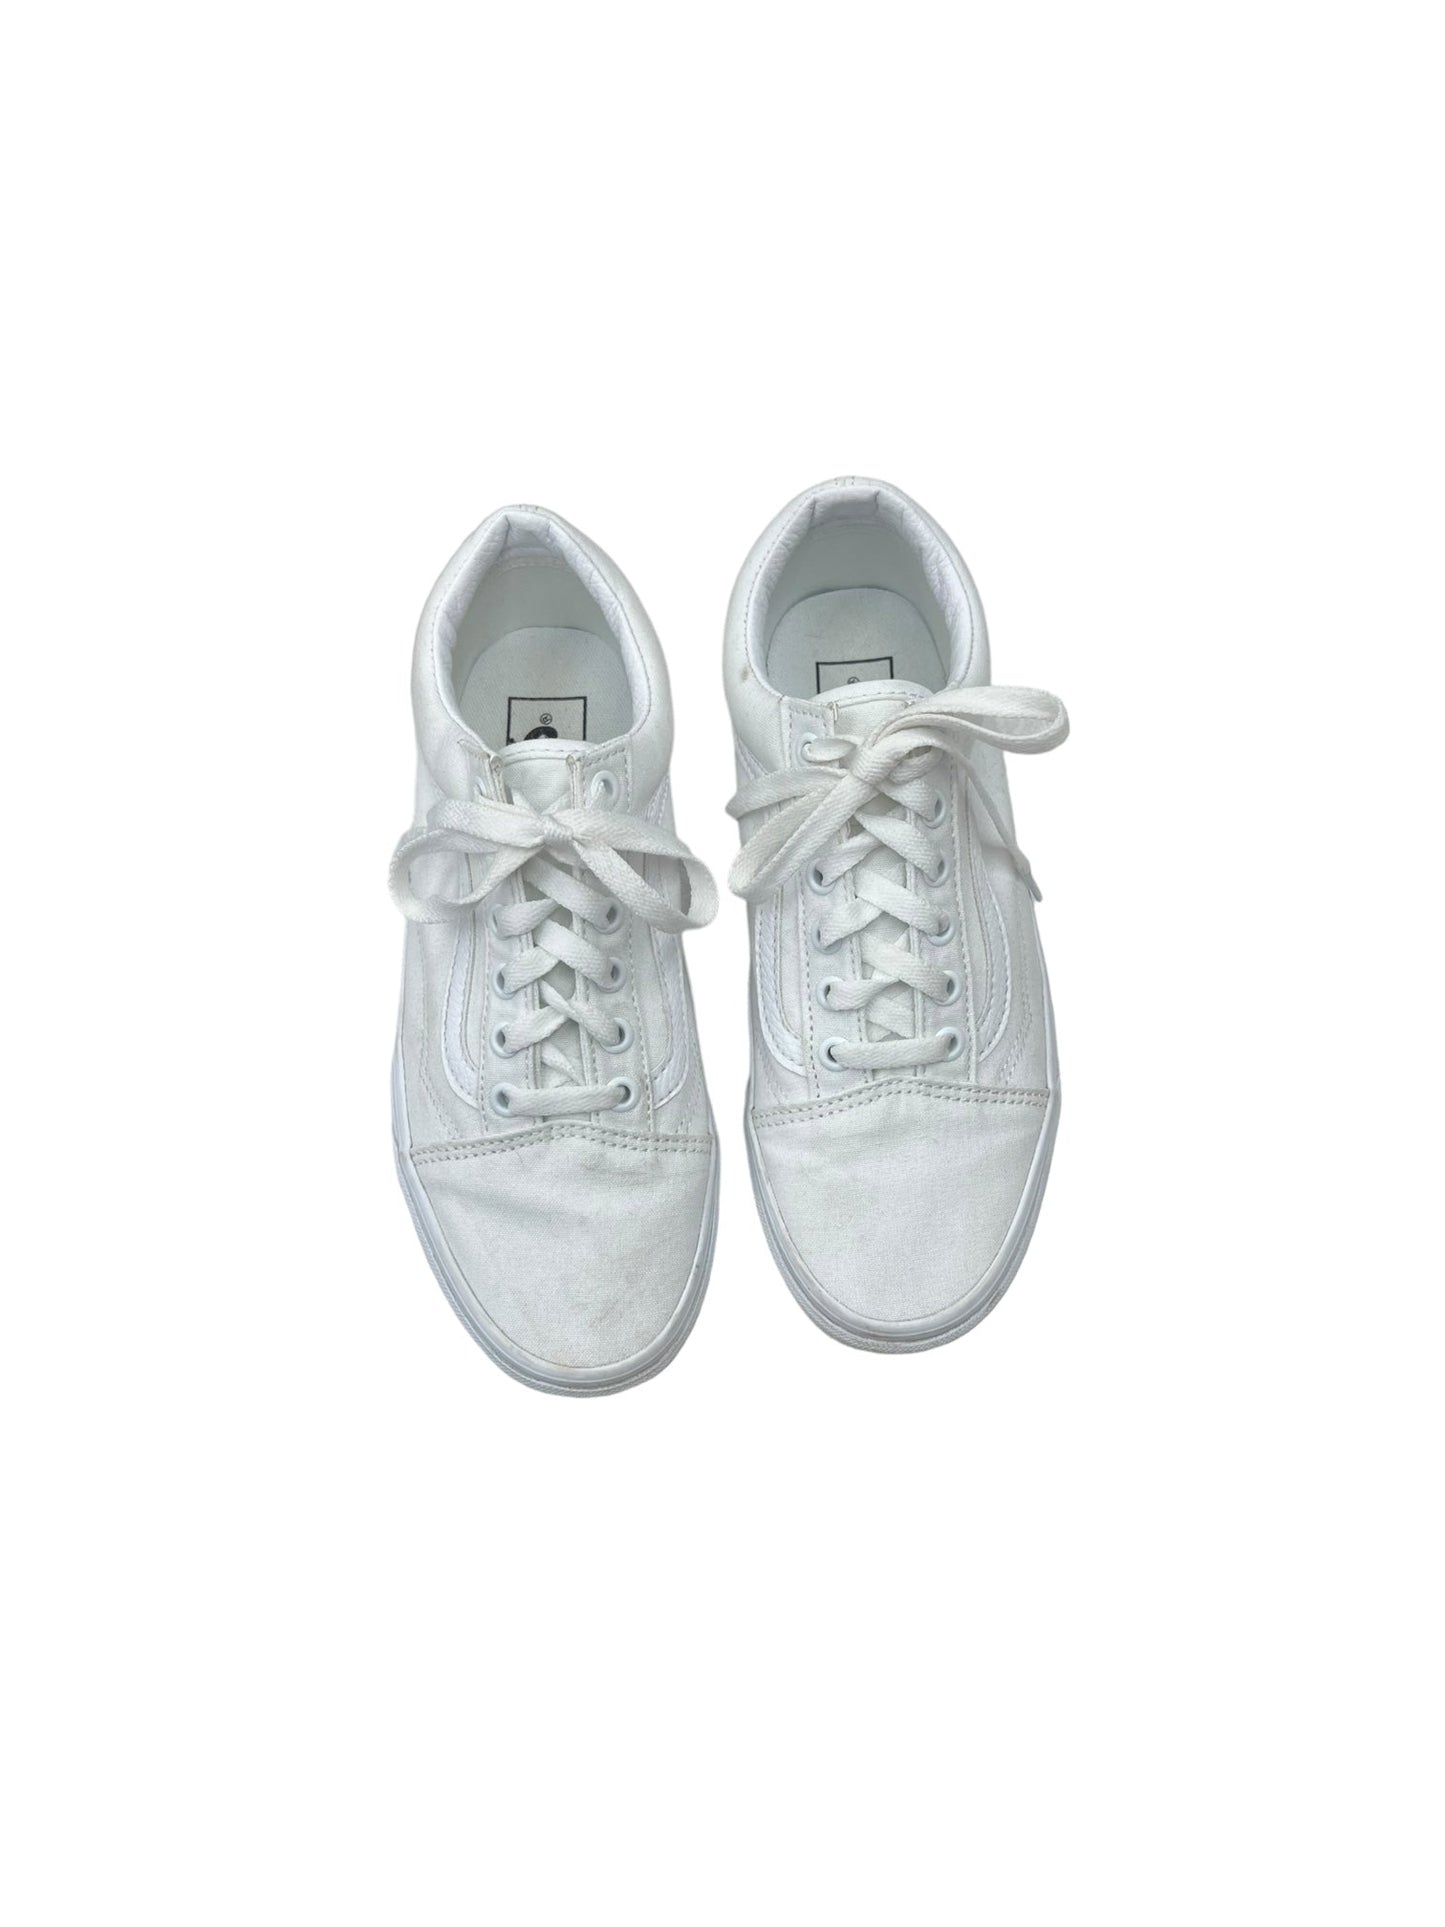 White Shoes Sneakers Vans, Size 7